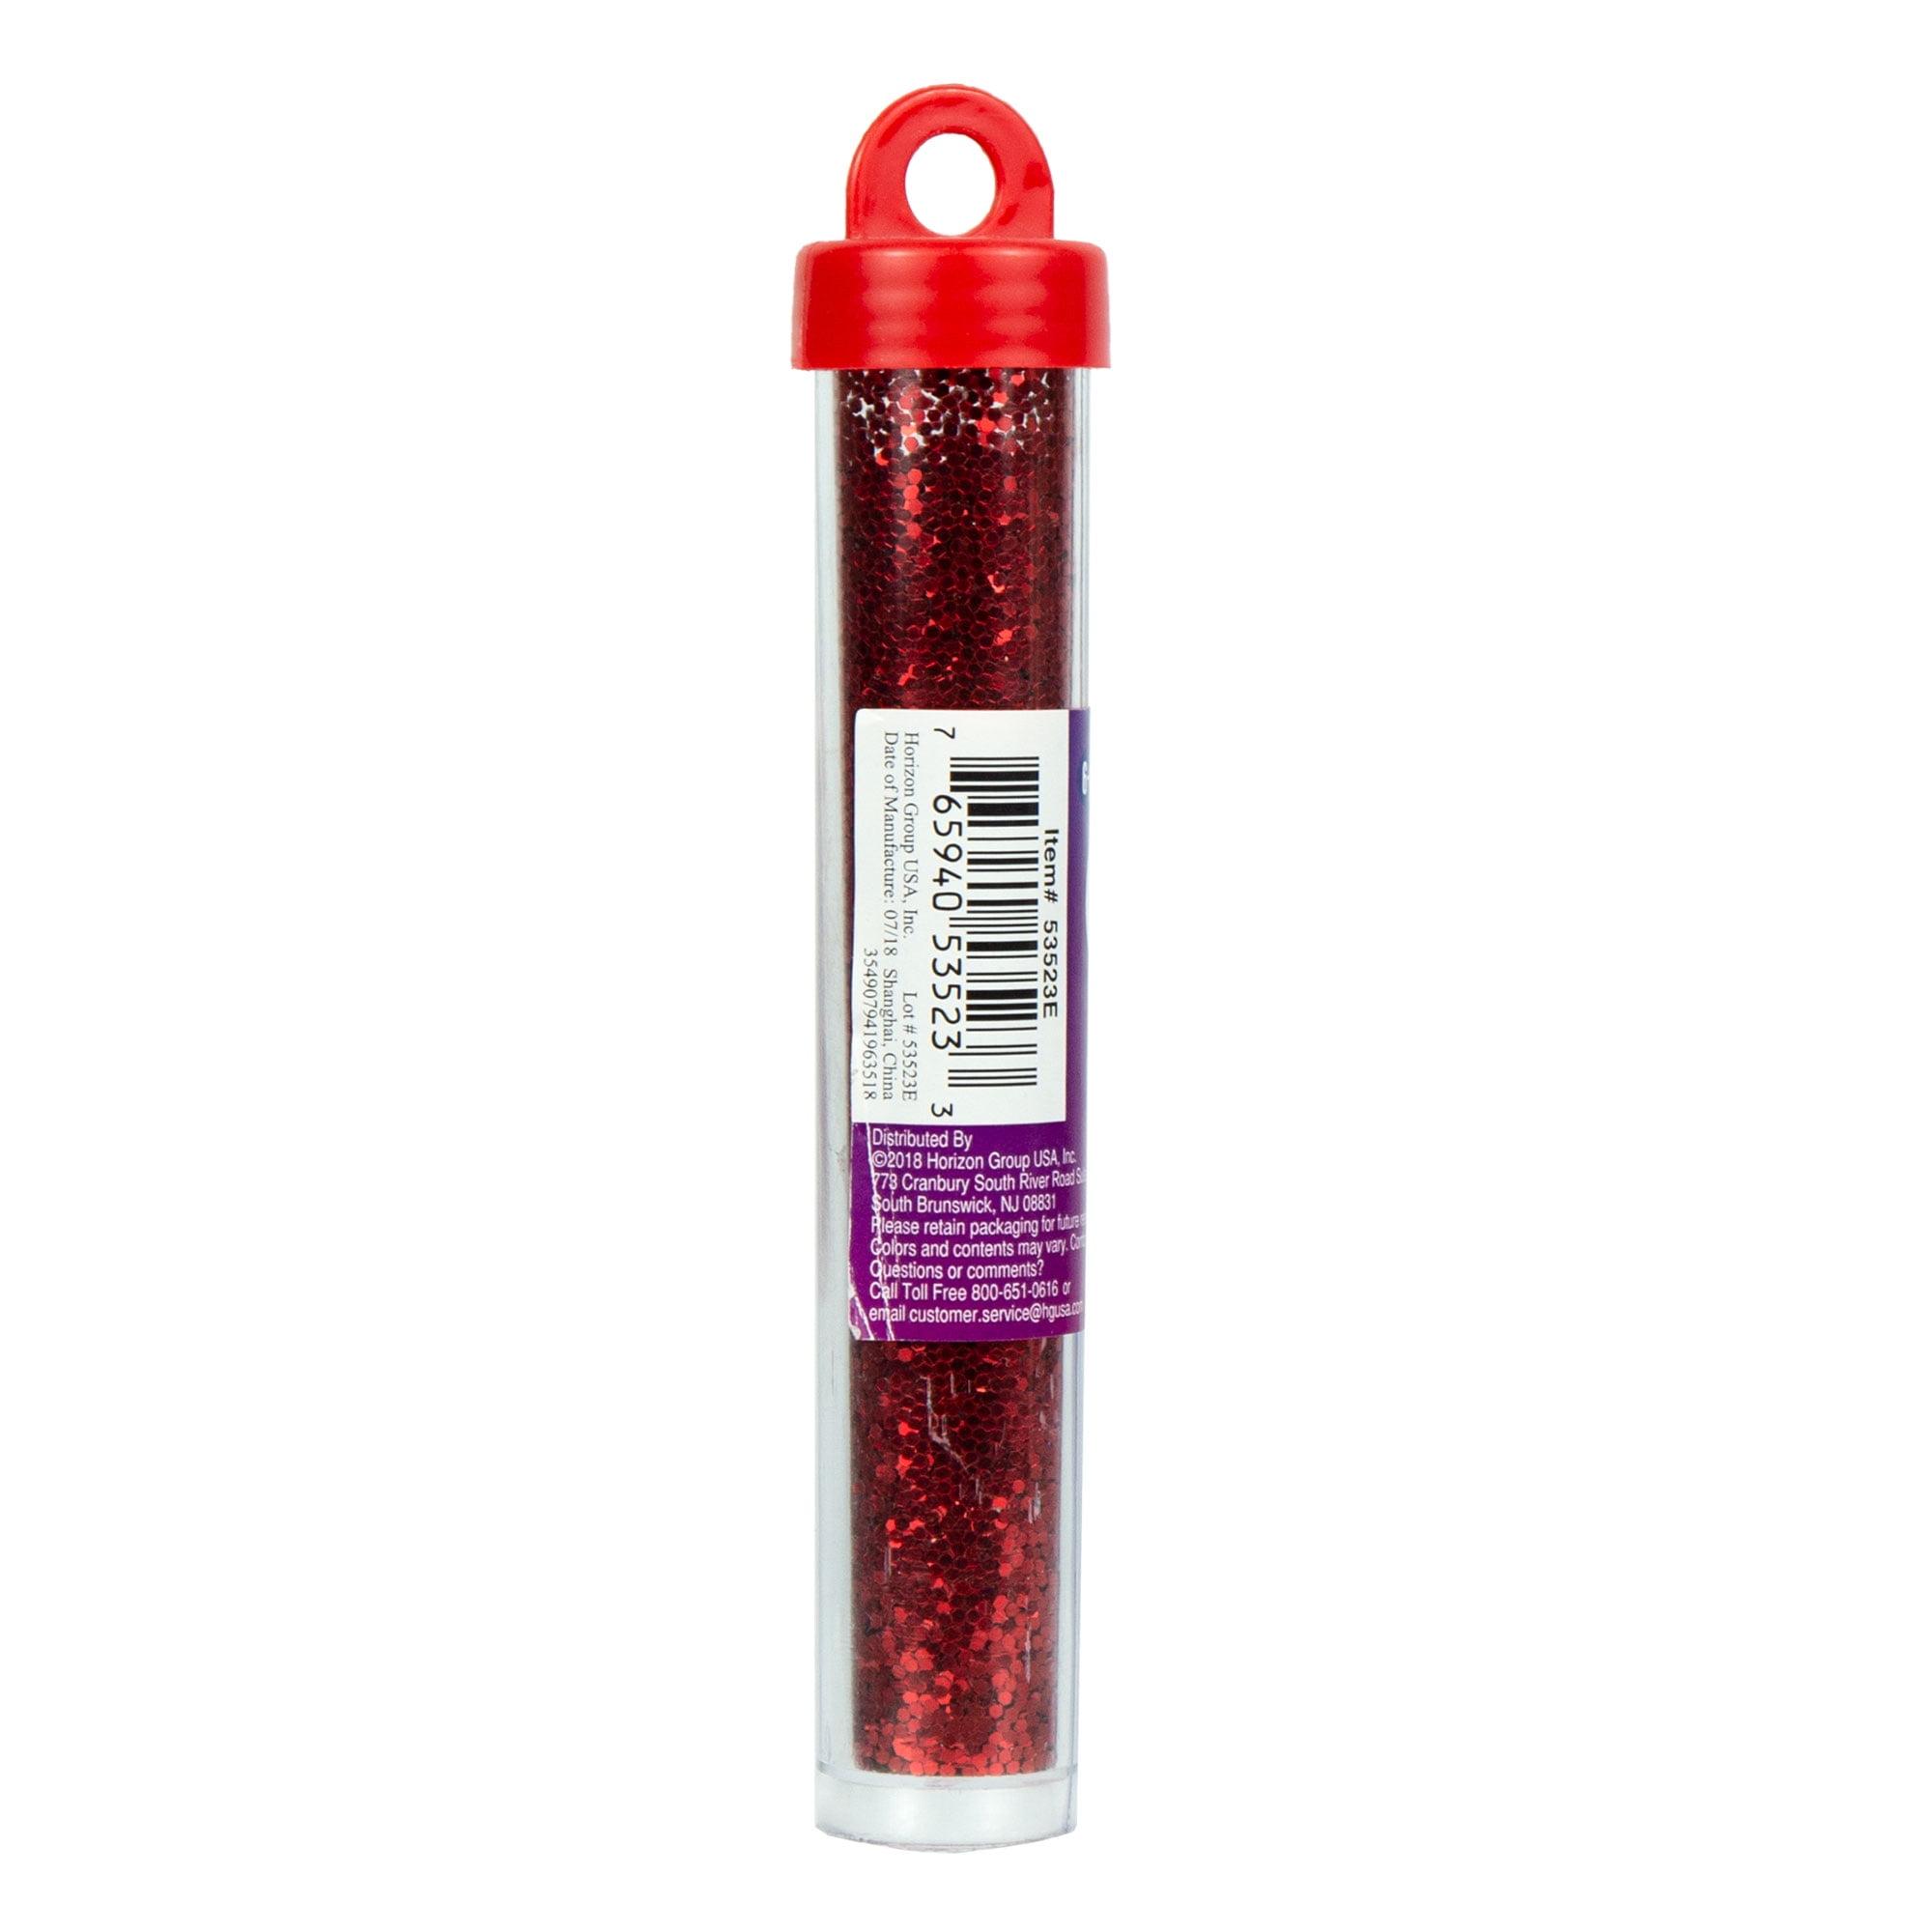 Red Glitter Acrylic, CO2 Laser Glowforge Ready, 3-pack, 1/8th